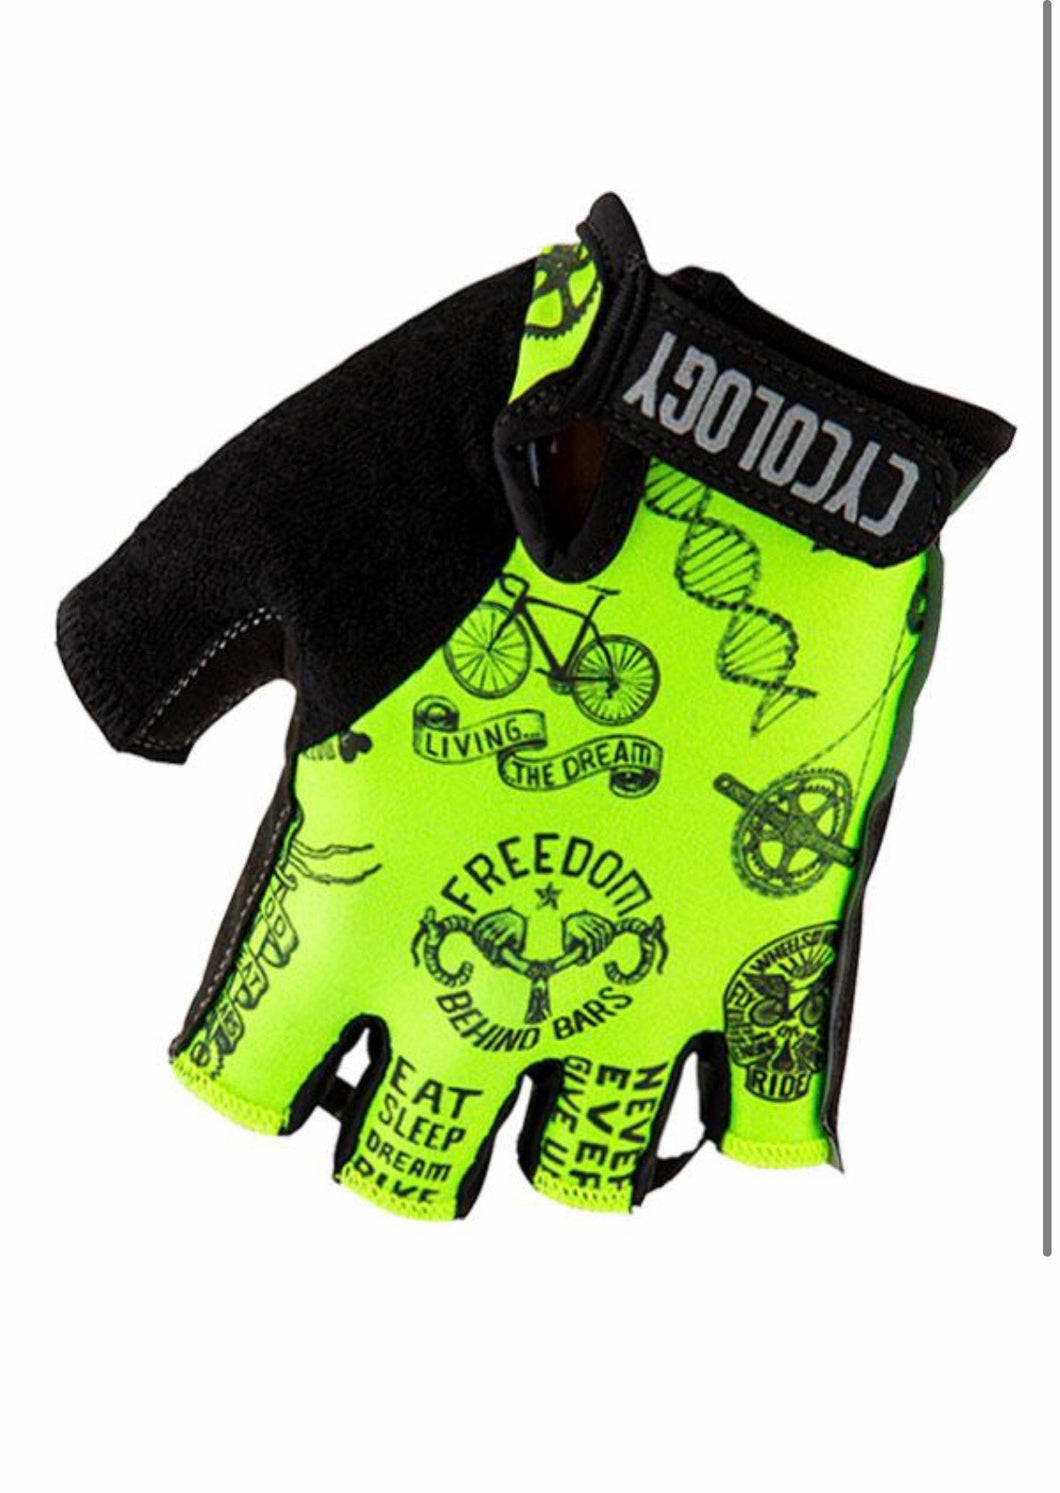 Cycology Quality Unisex Short-Fingered Cycling Gloves - Design Velosophy